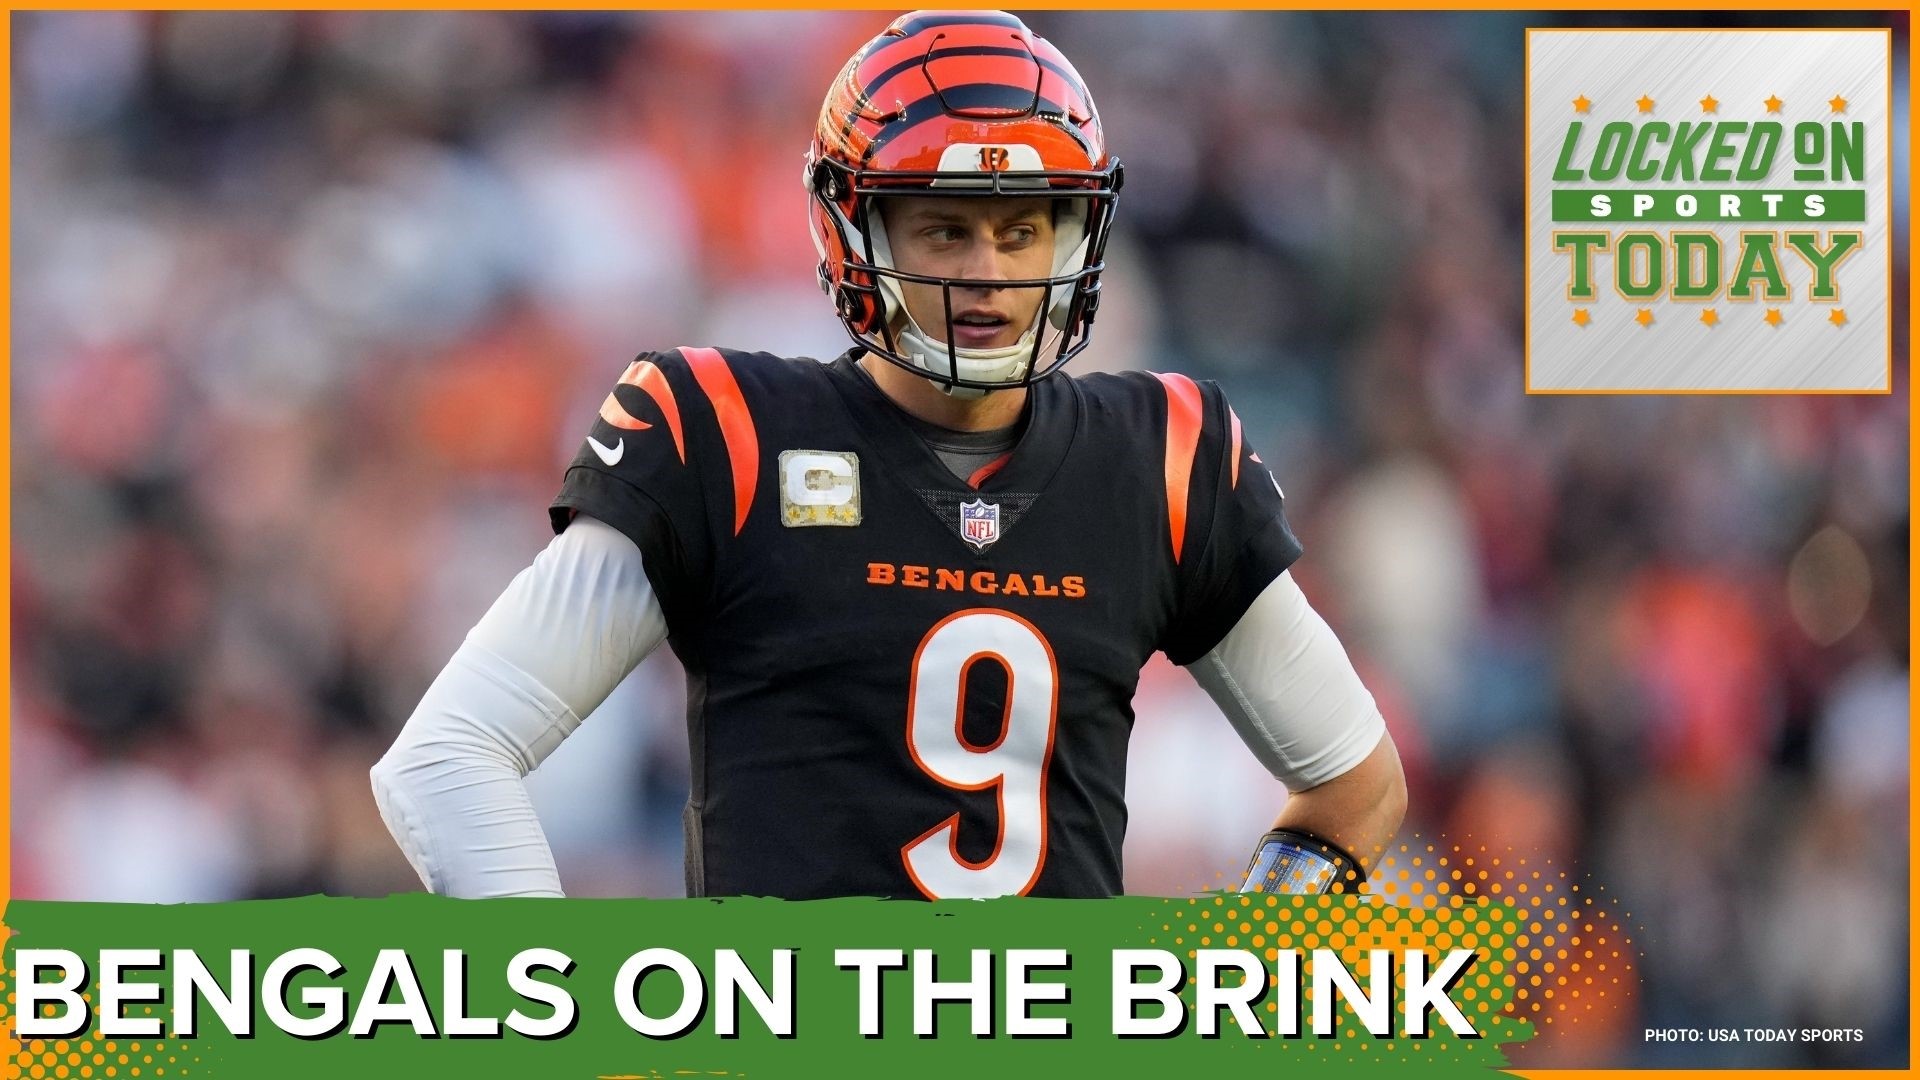 Discussing the day's top sports stories from the Bengals season is on the brink to Draymond Green gets suspended and Justin Fields returns.